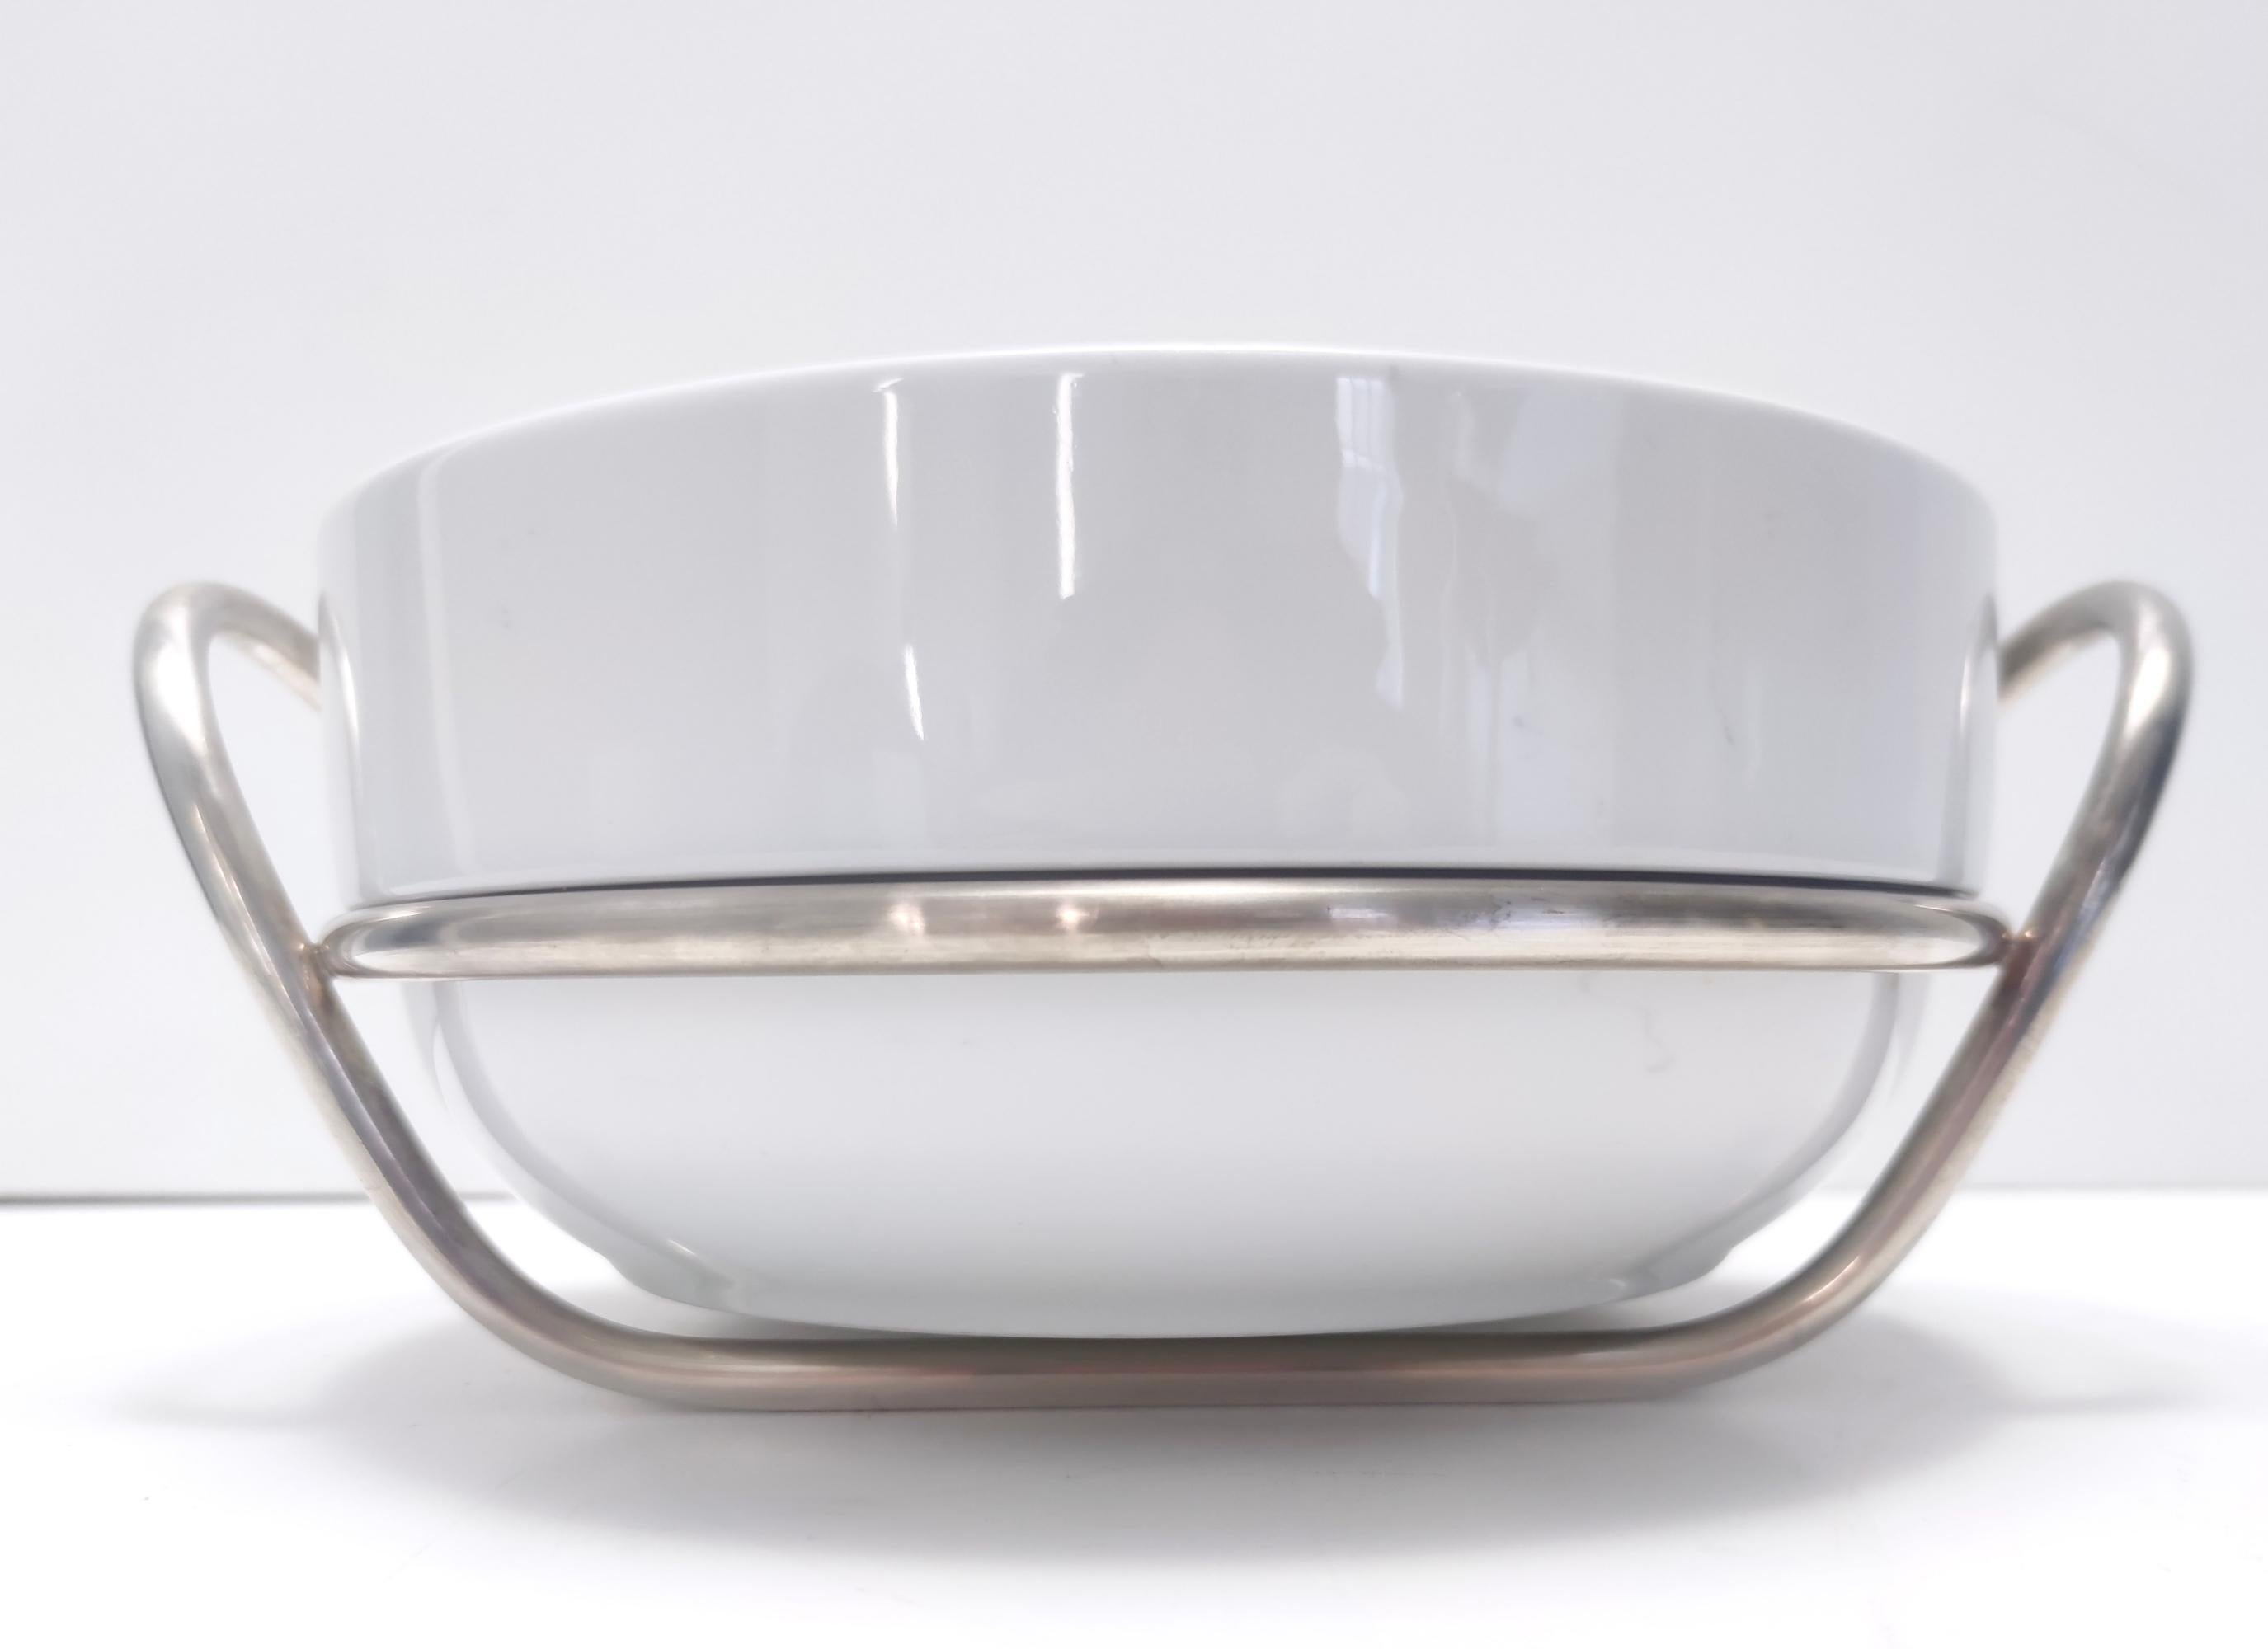 Late 20th Century Postmodern Lino Sabattini Silver-Plated and White Ceramic Serving Bowl, Italy For Sale